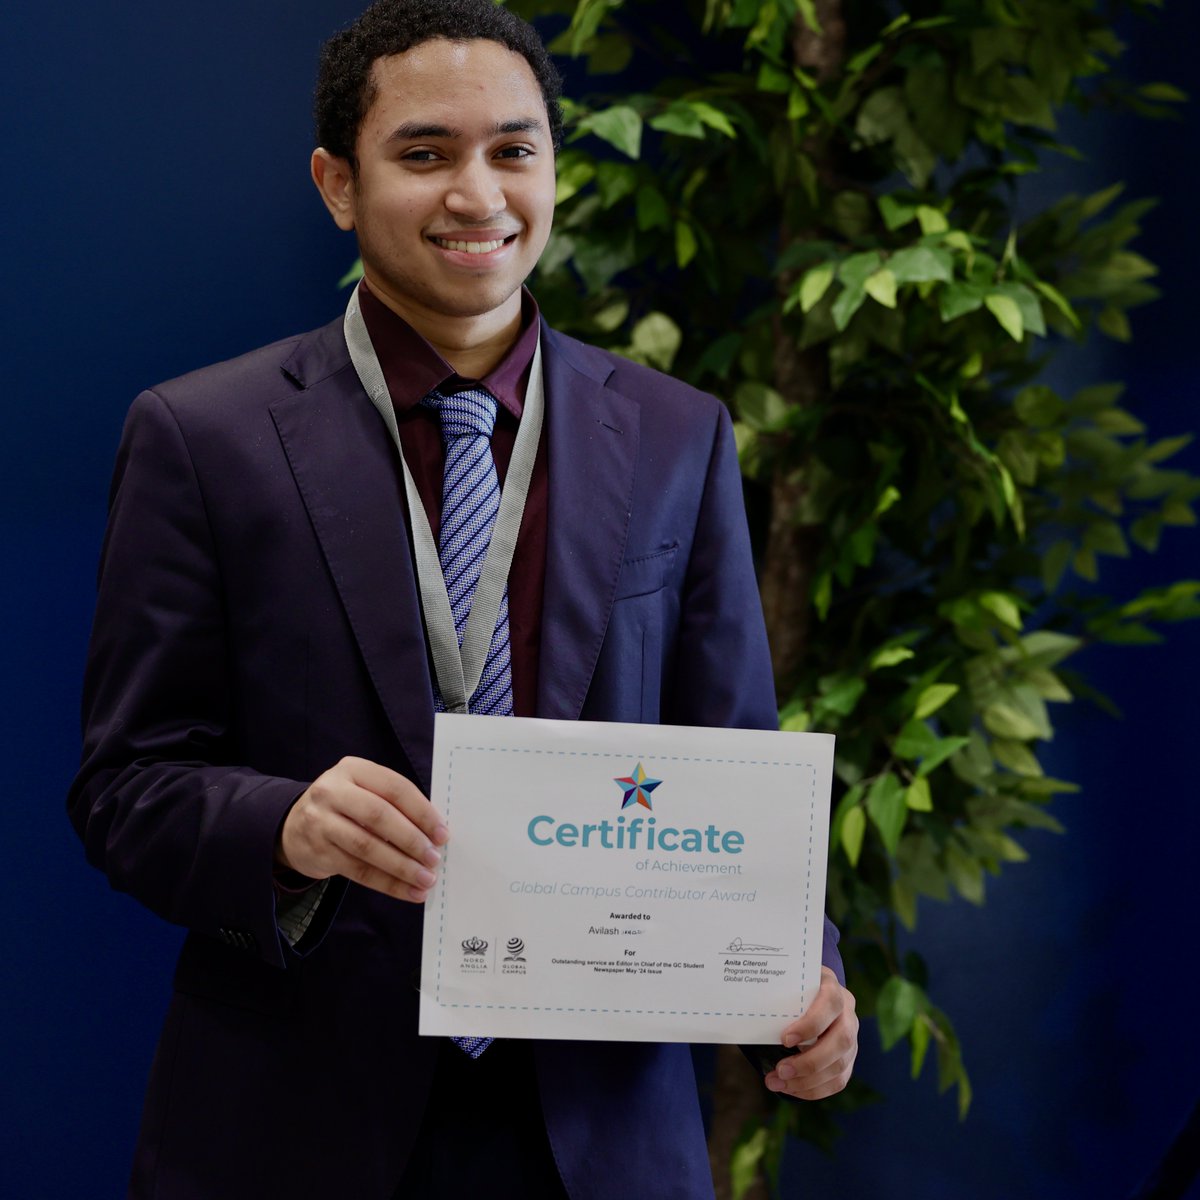 The latest issue of the GC newspaper exploring the theme of ‘Embracing Culture’ is out and our world class #AcademicAchiever Y12 Avilash has been honored with a certificate of achievement for outstanding service as editor in chief of the Nord Anglia student led newspaper.